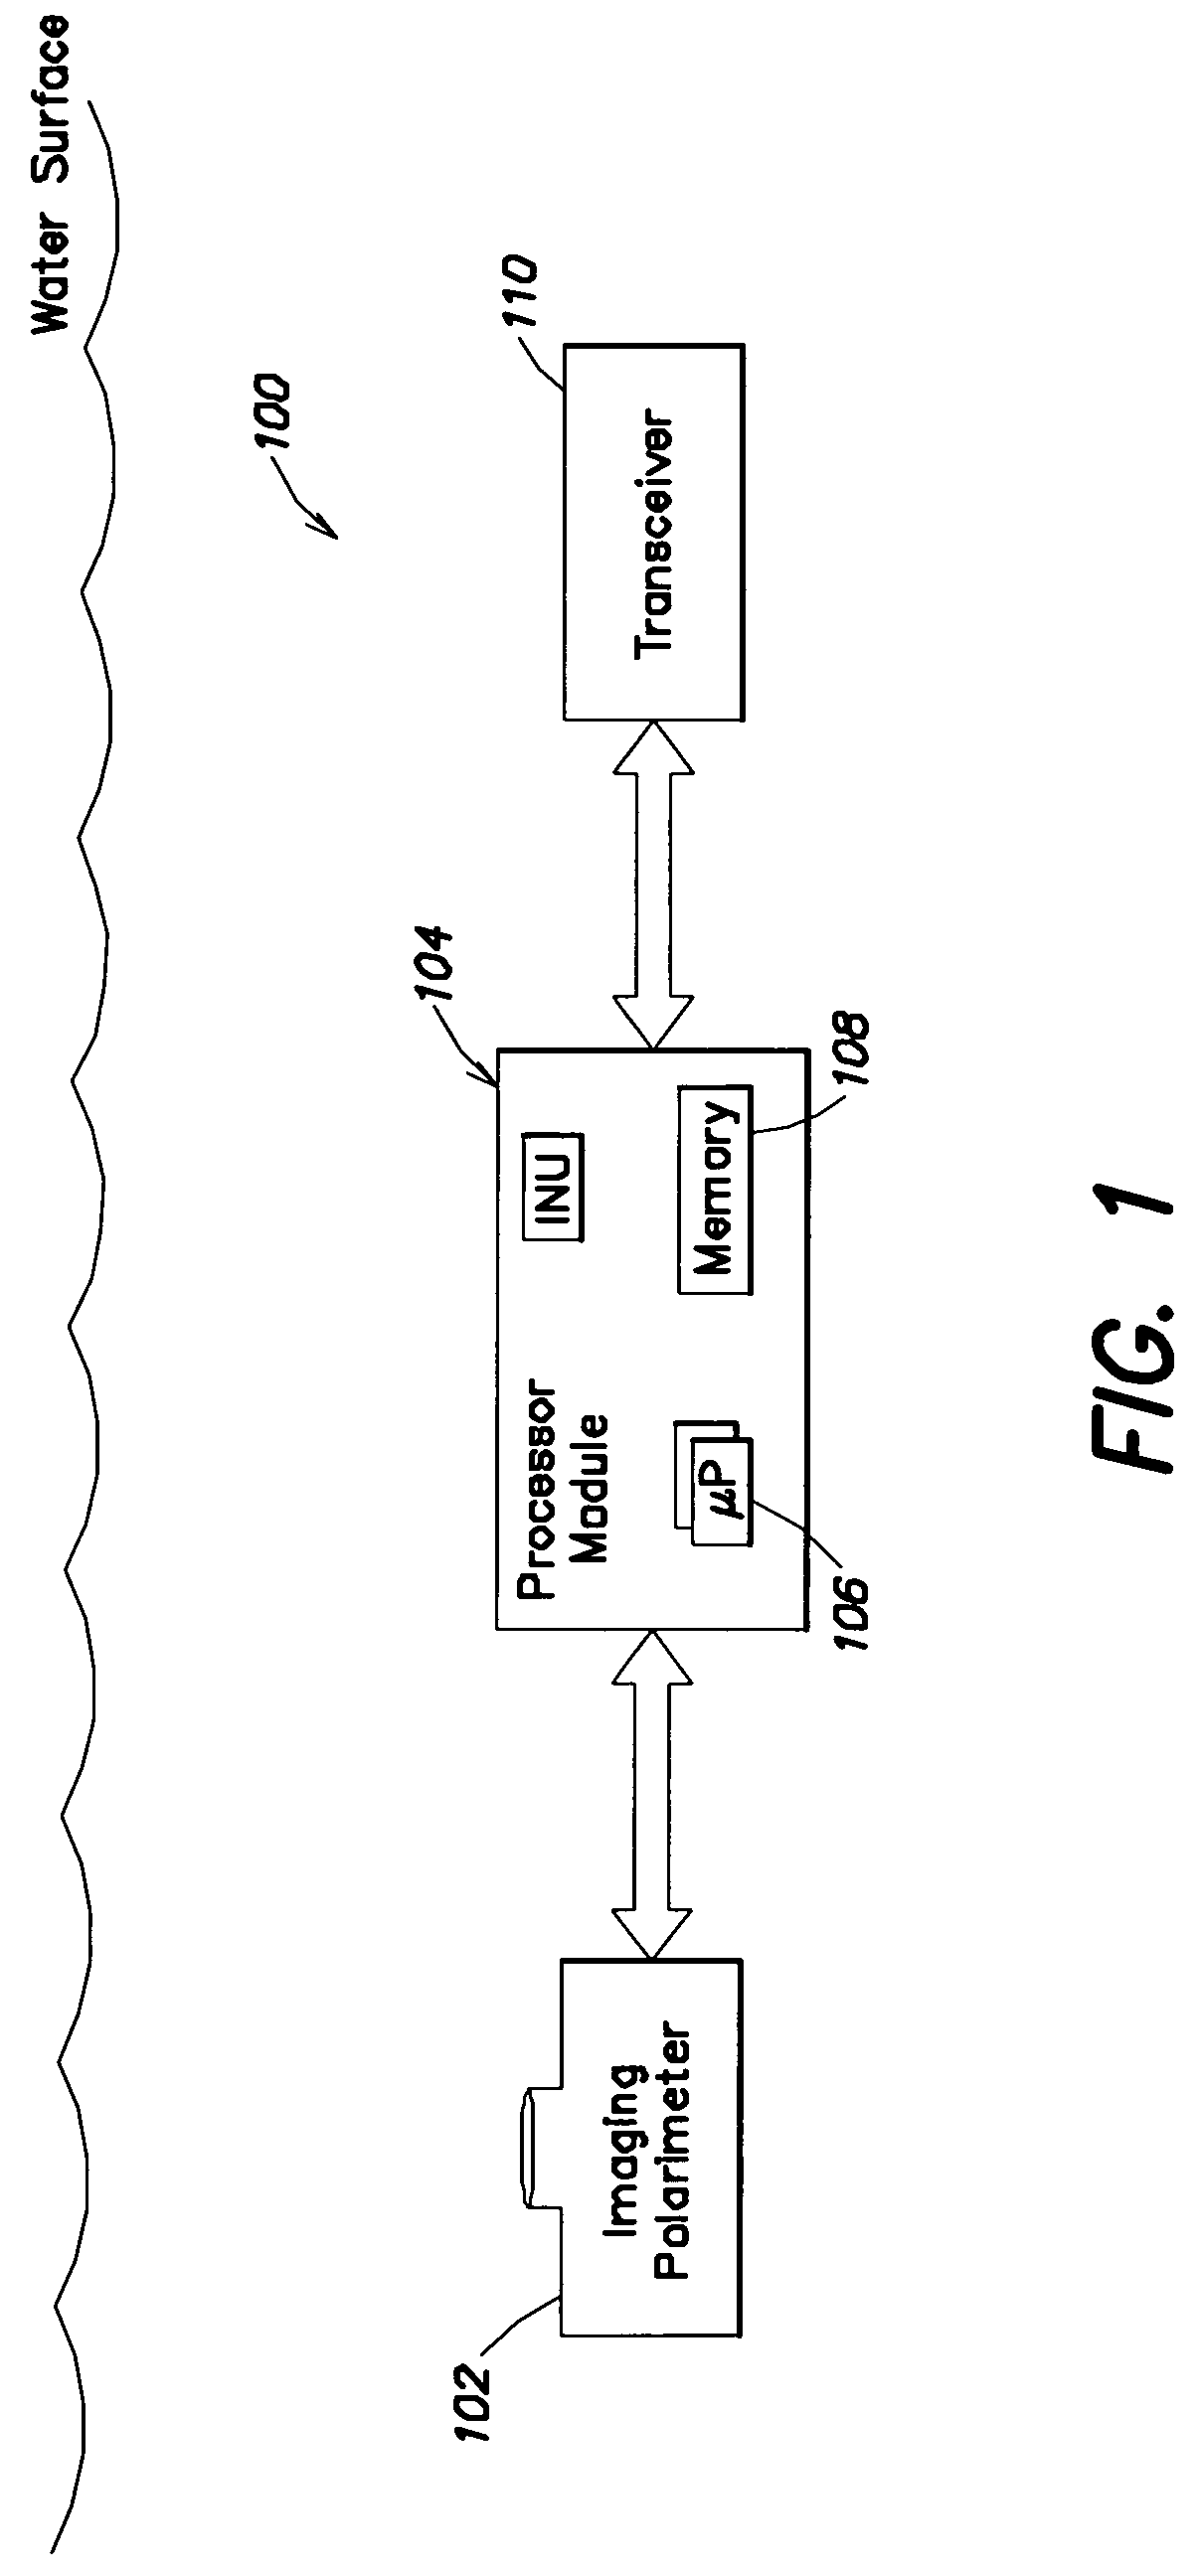 System and method for imaging through an irregular water surface